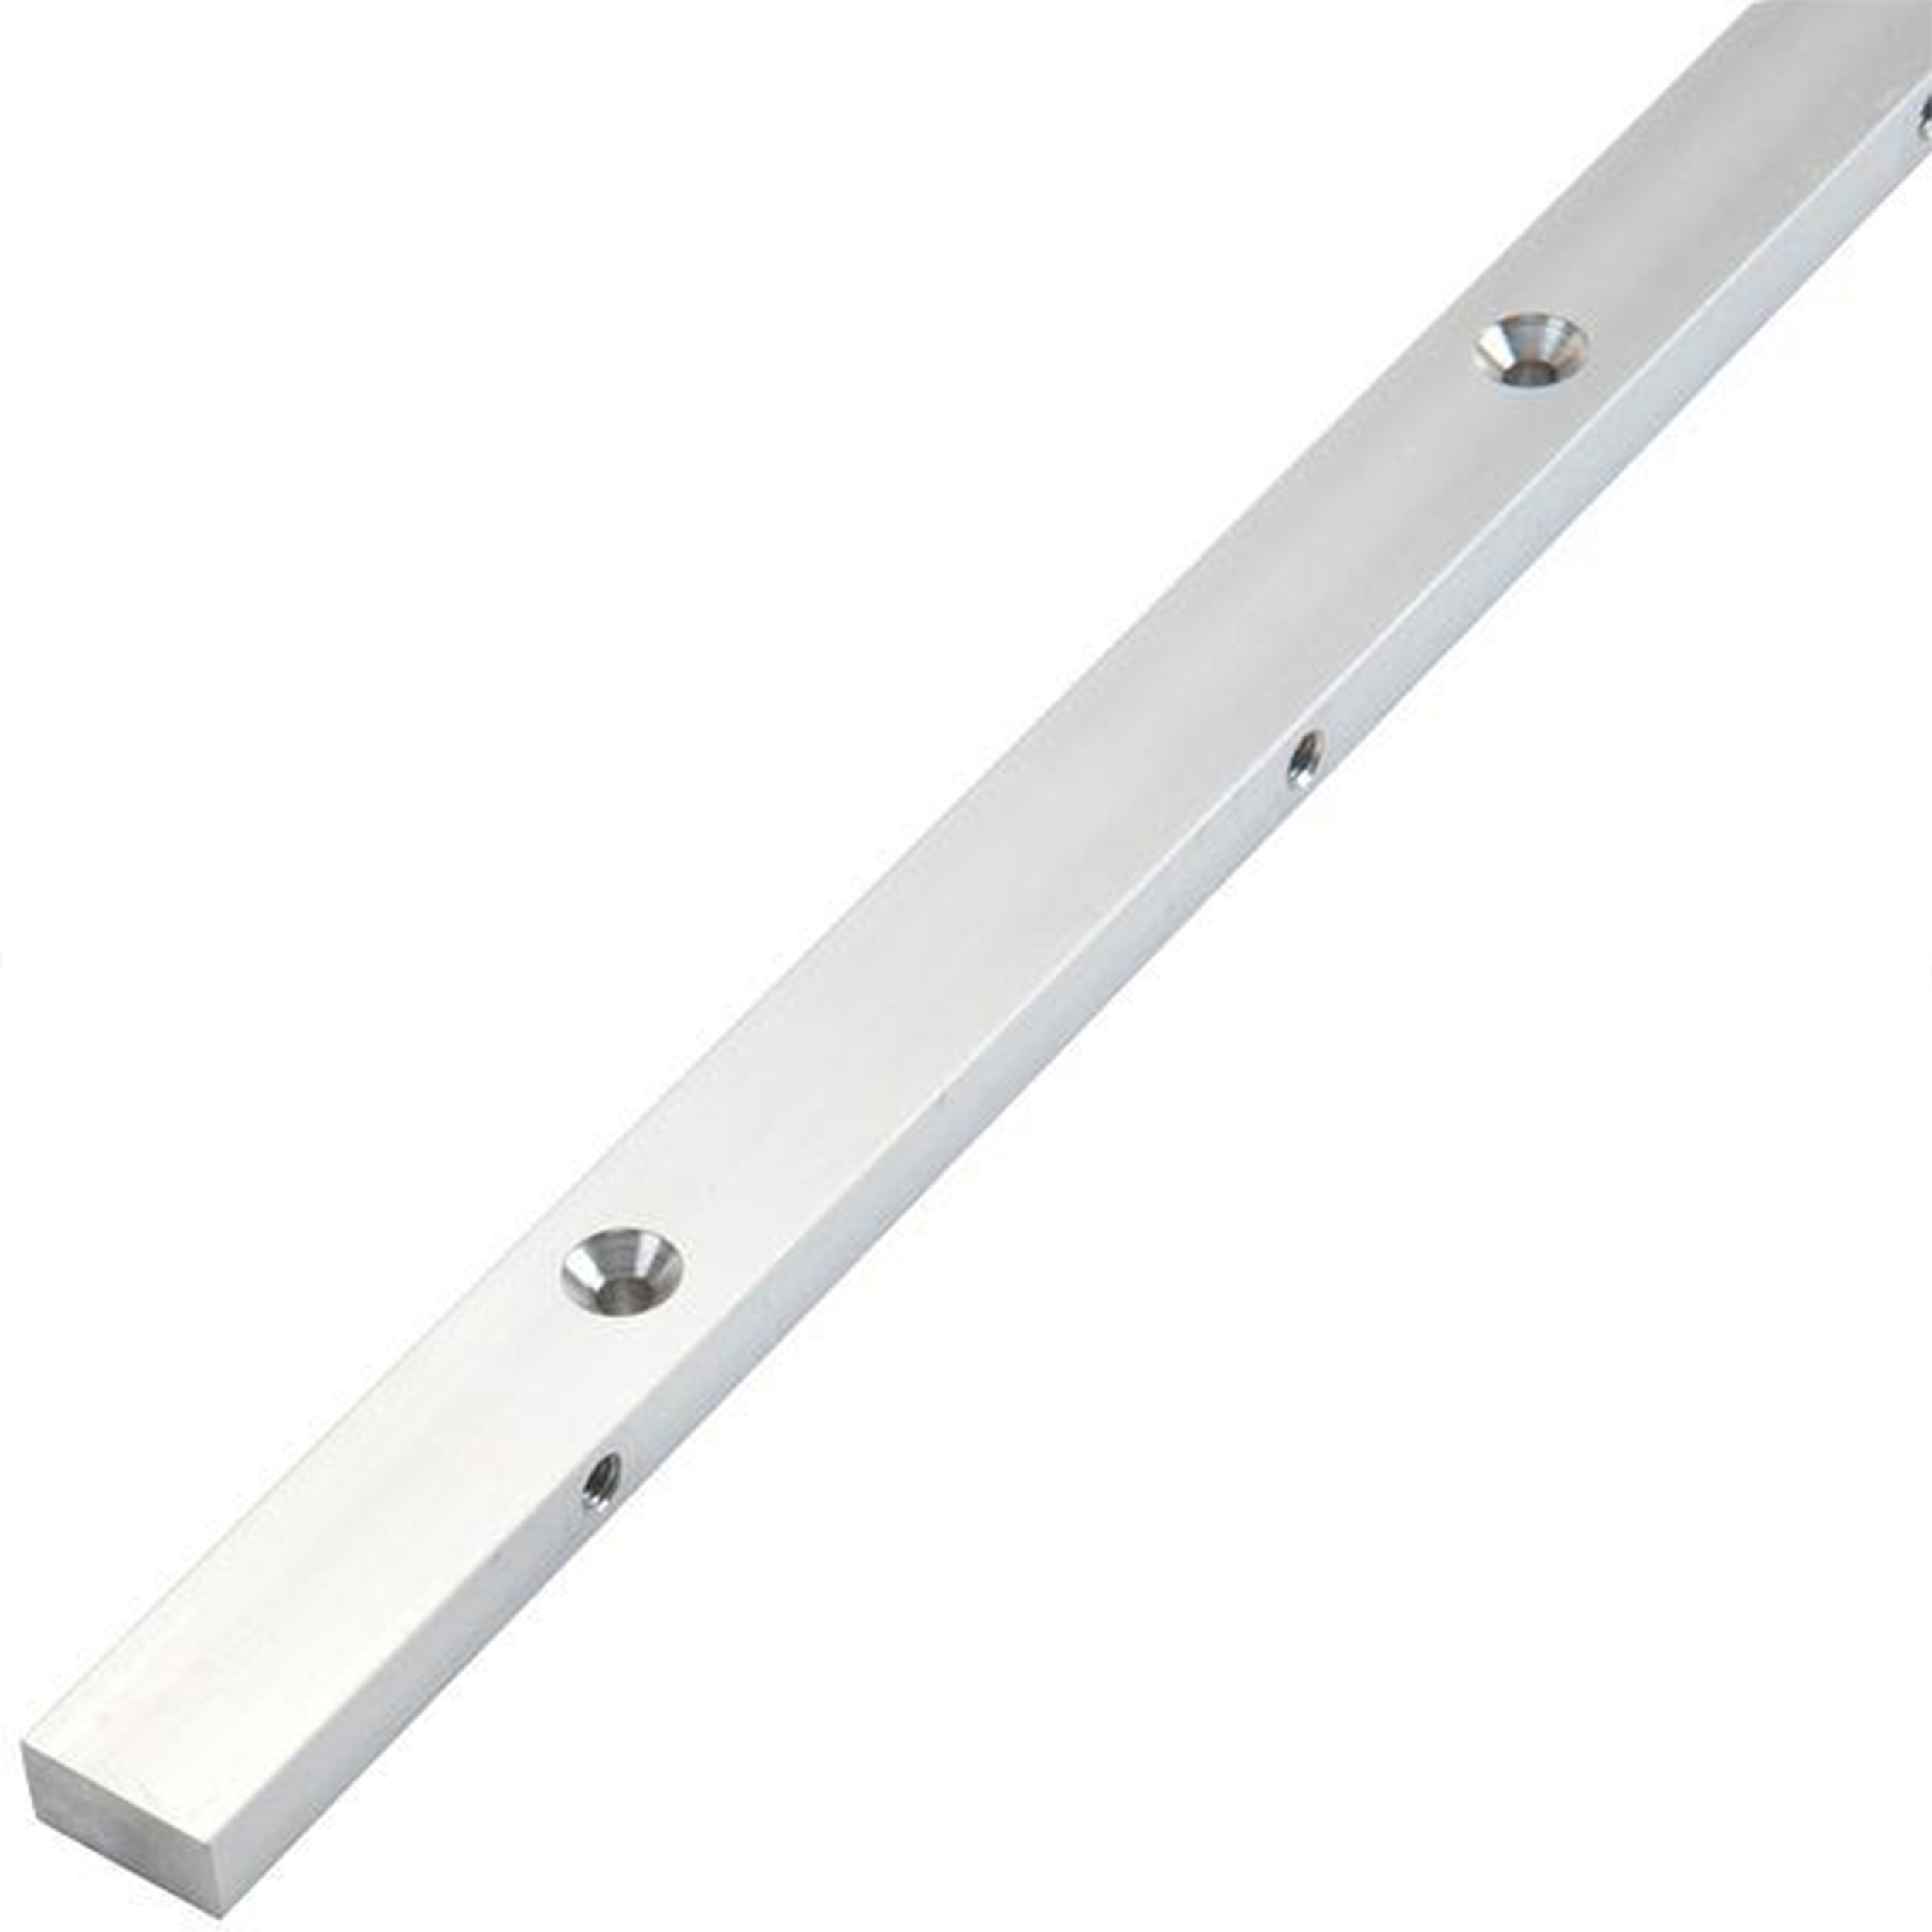 30-inch Jig And Fixture Bar, # Kms7303